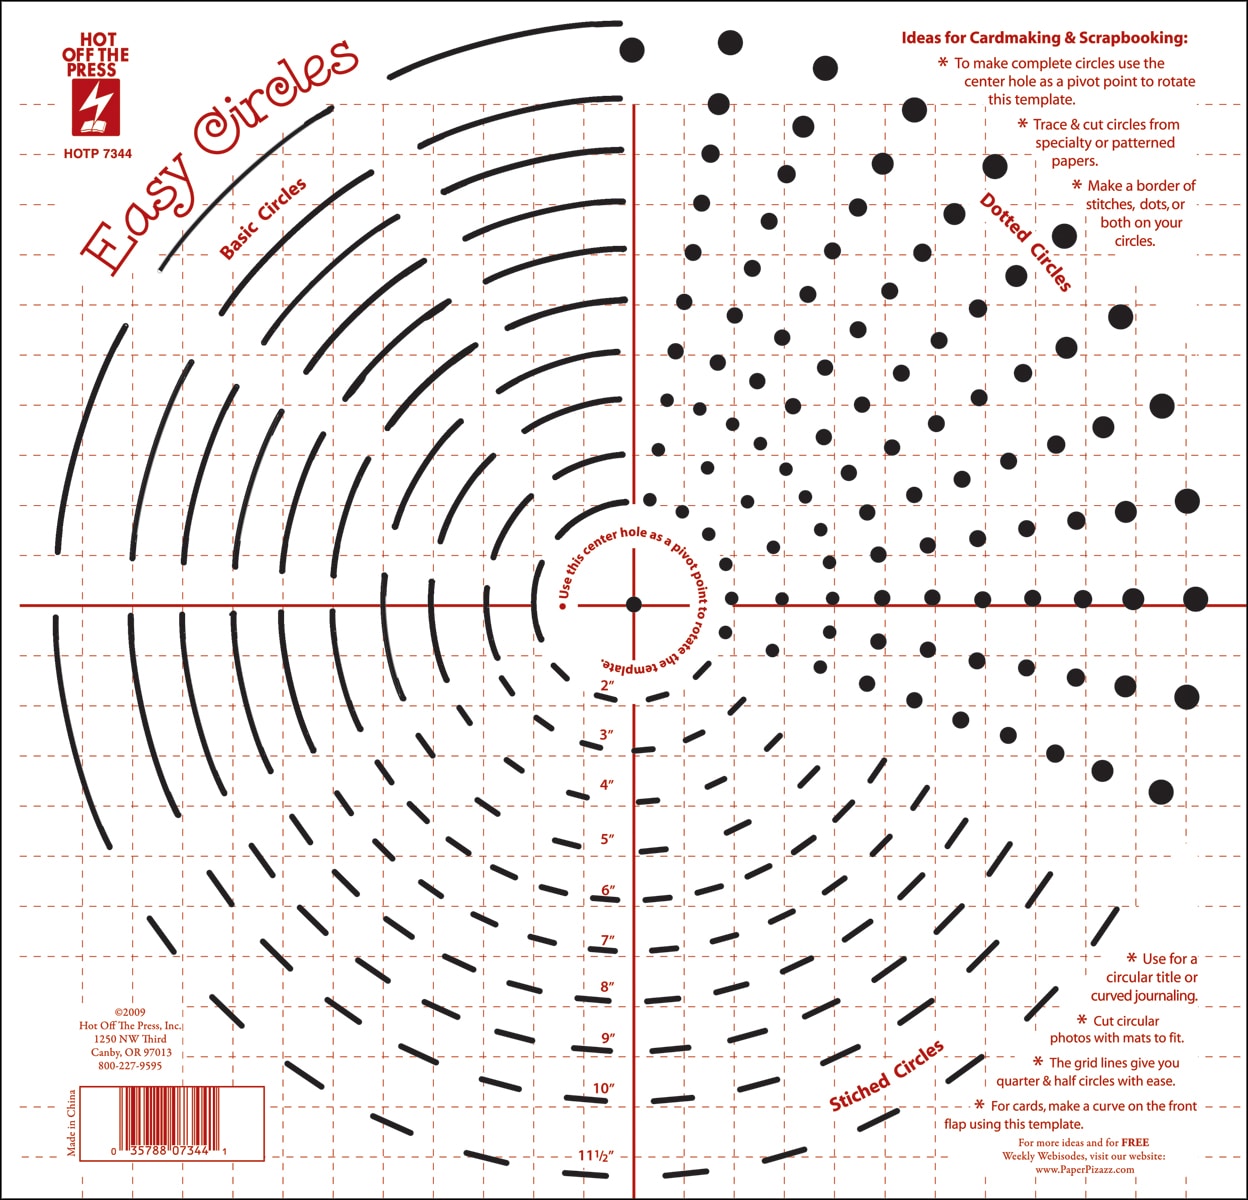 Hot Off The Press Templates 12x12 easy Circles